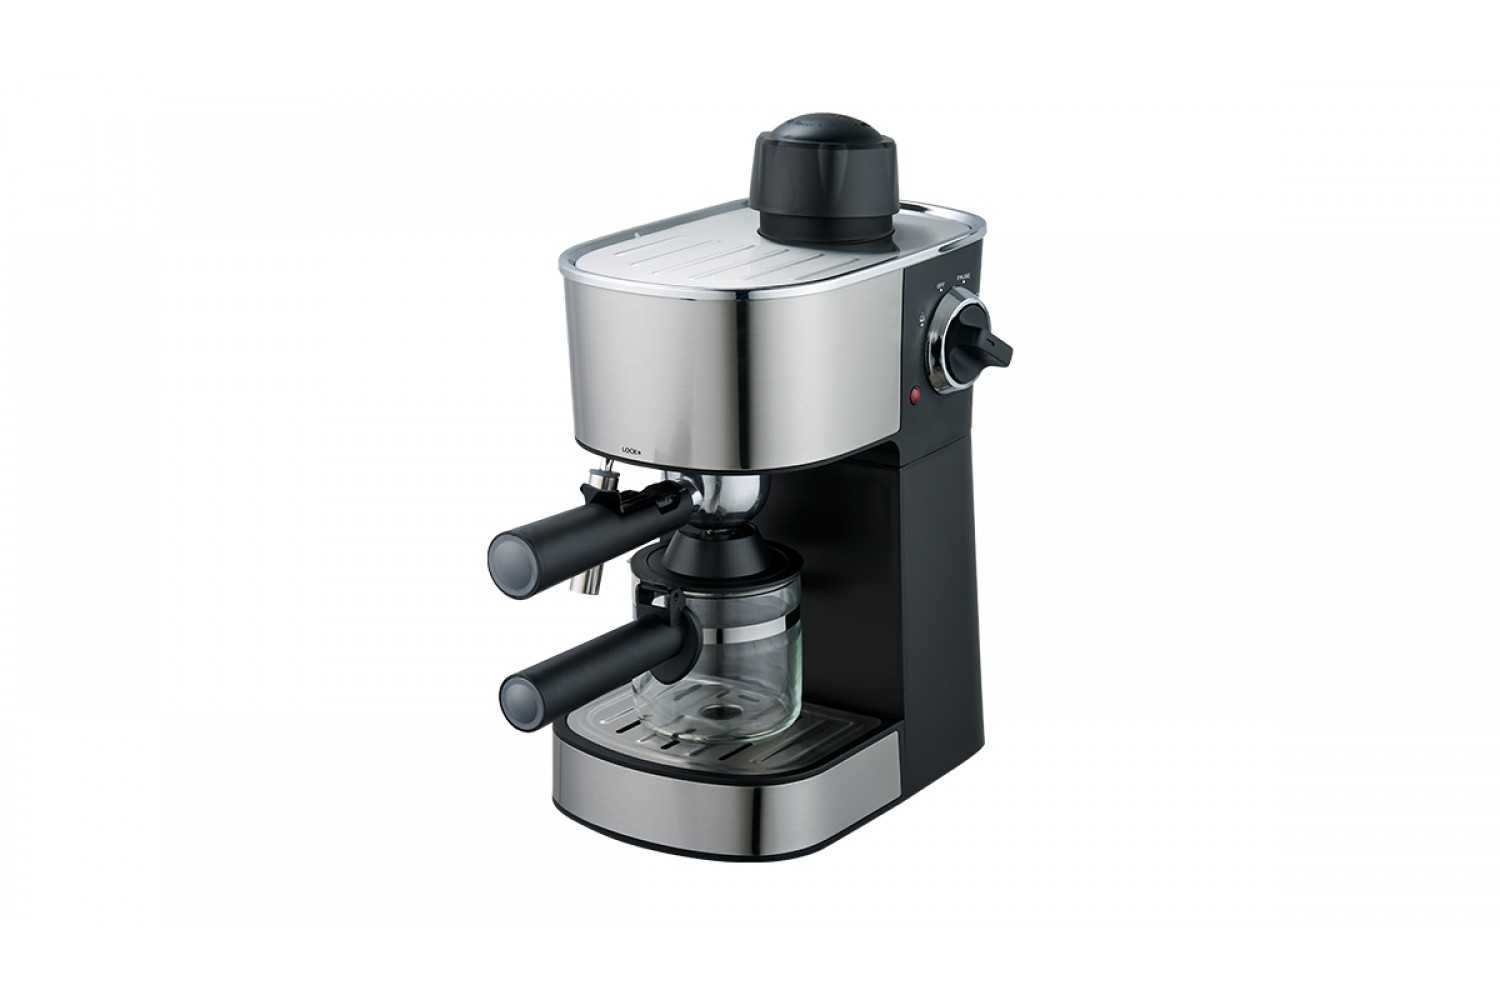 4 Cup Espresso Maker Kf-9900 With One Touch Function